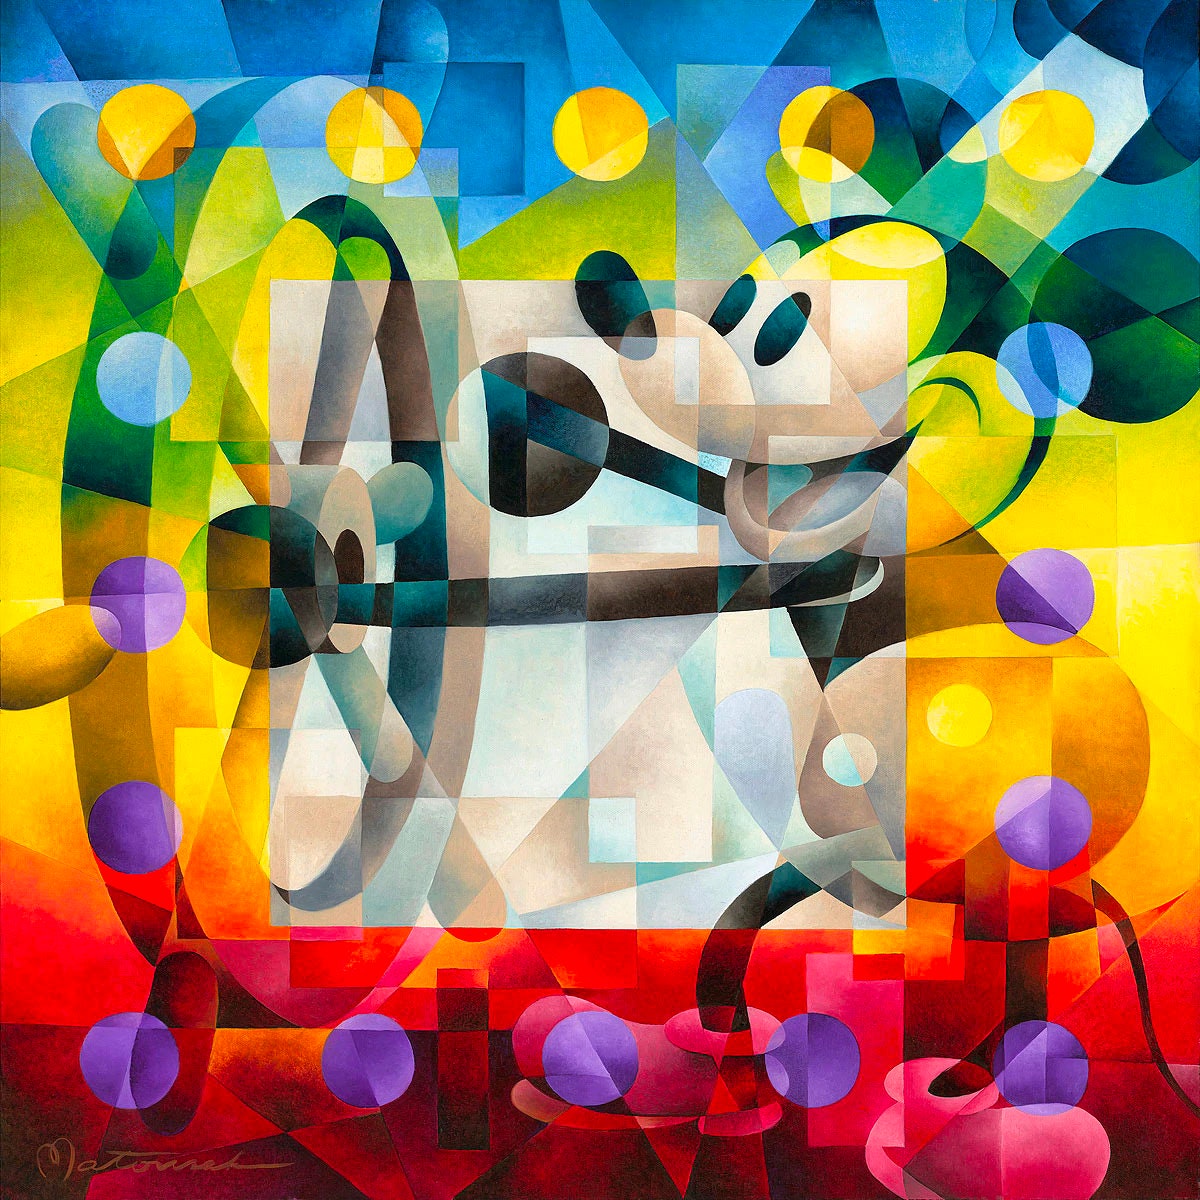 Mickey Mouse Walt Disney Fine Art Tom Matousek Signed Limited Edition of 295 on Canvas "Steamboat Willie"